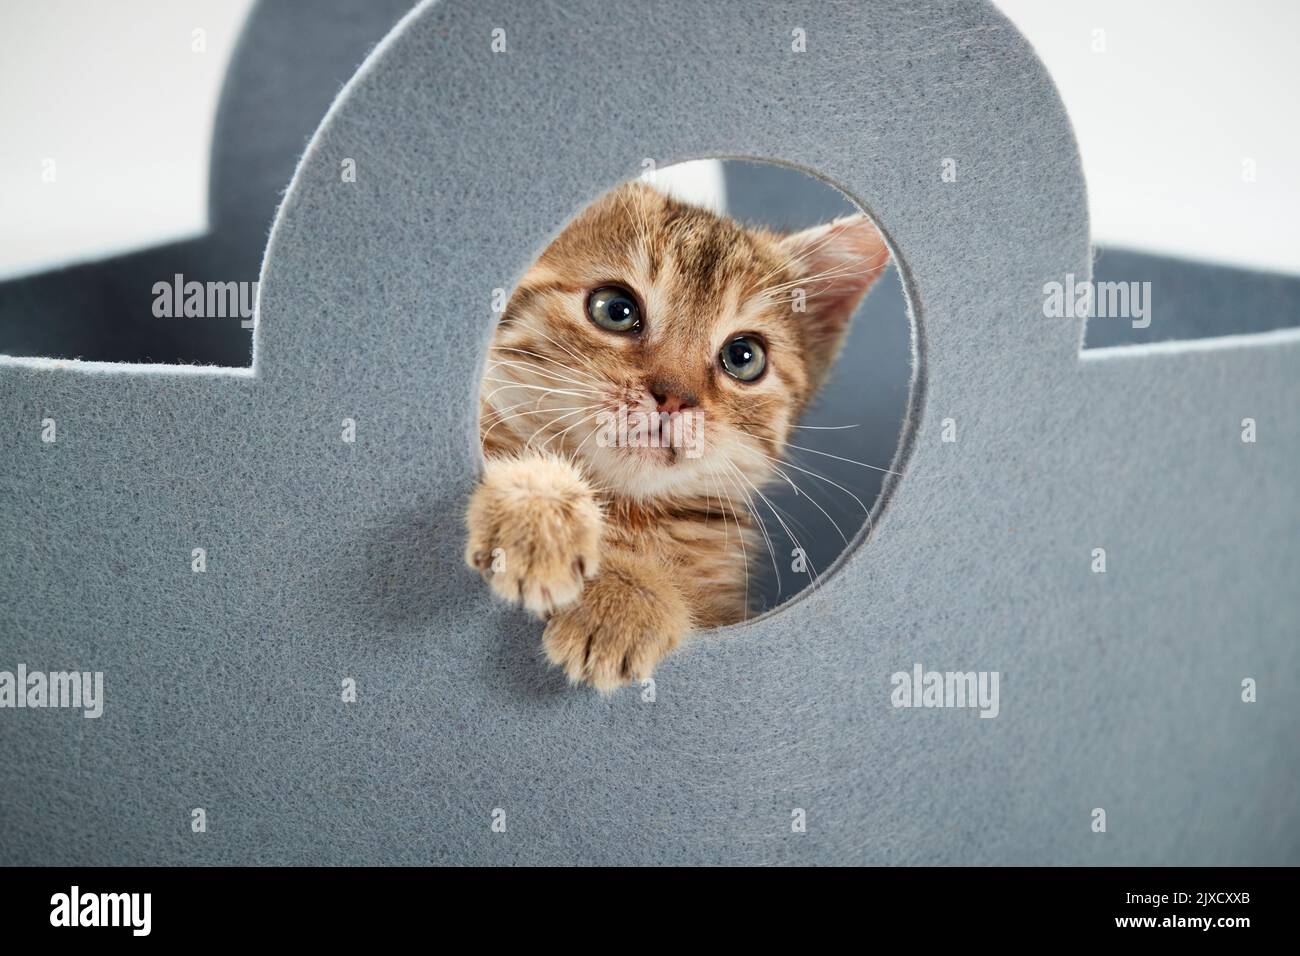 Domestic cat. A tabby kitten looks out of a felt bag, Germany Stock Photo